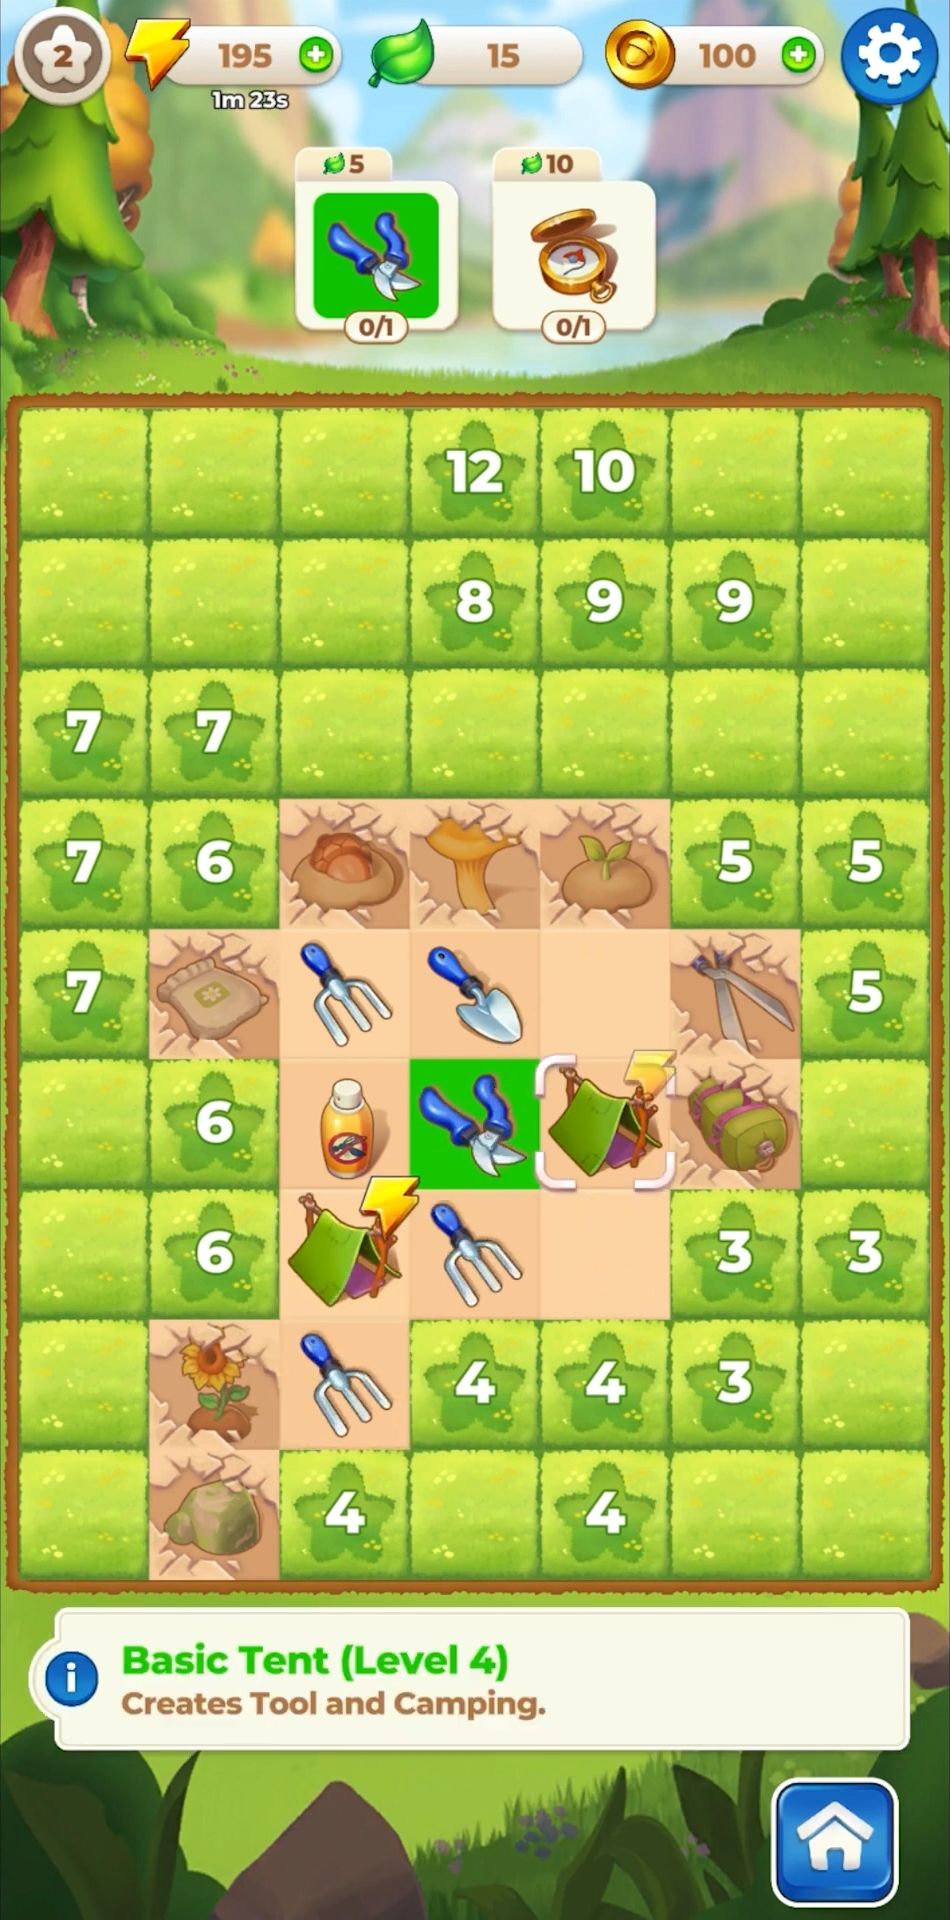 Gameplay of the Longleaf Valley for Android phone or tablet.